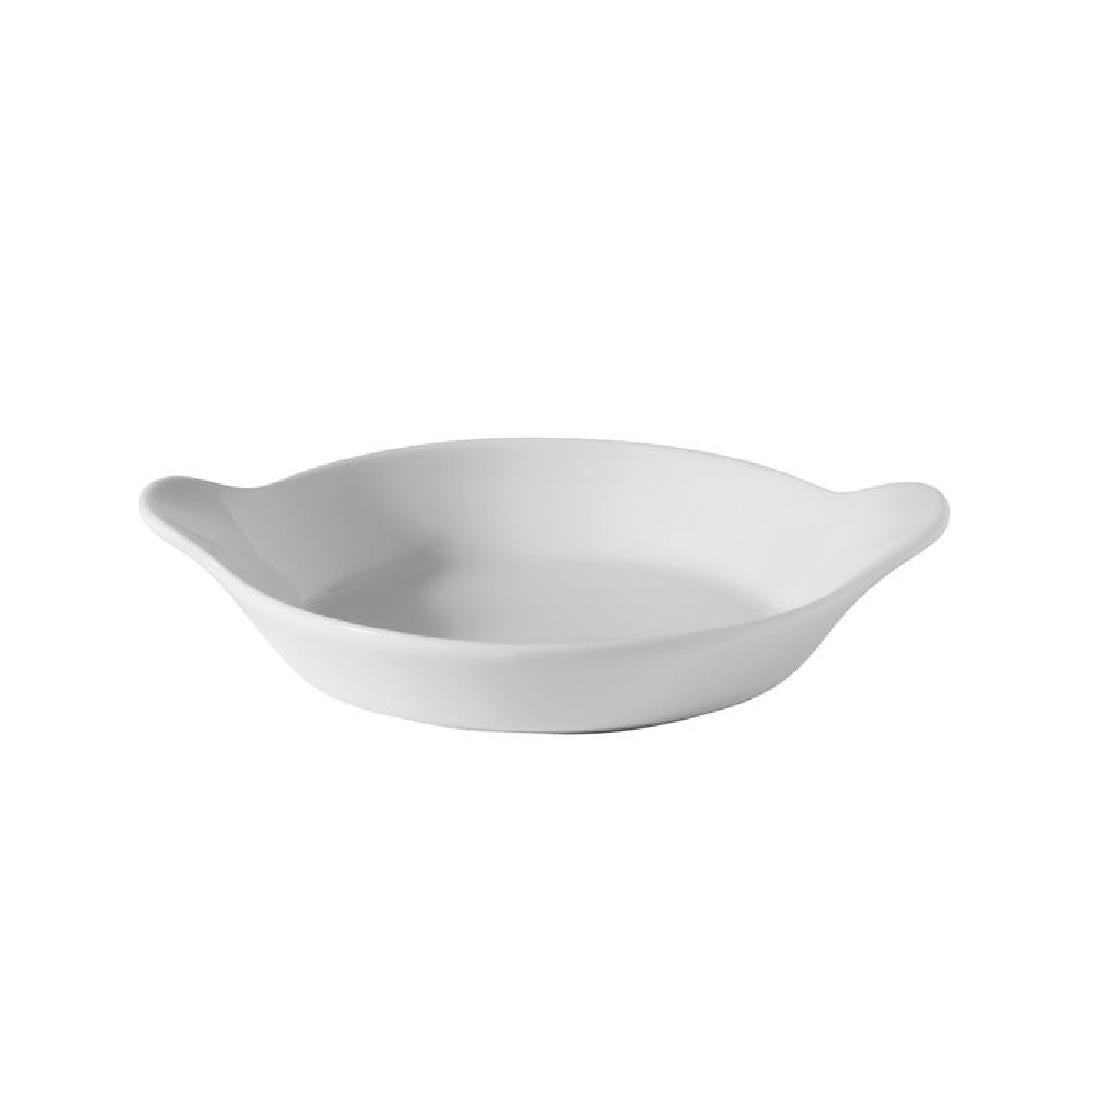 FH570 Utopia Titan Round Eared Dishes 130mm (Pack of 12)